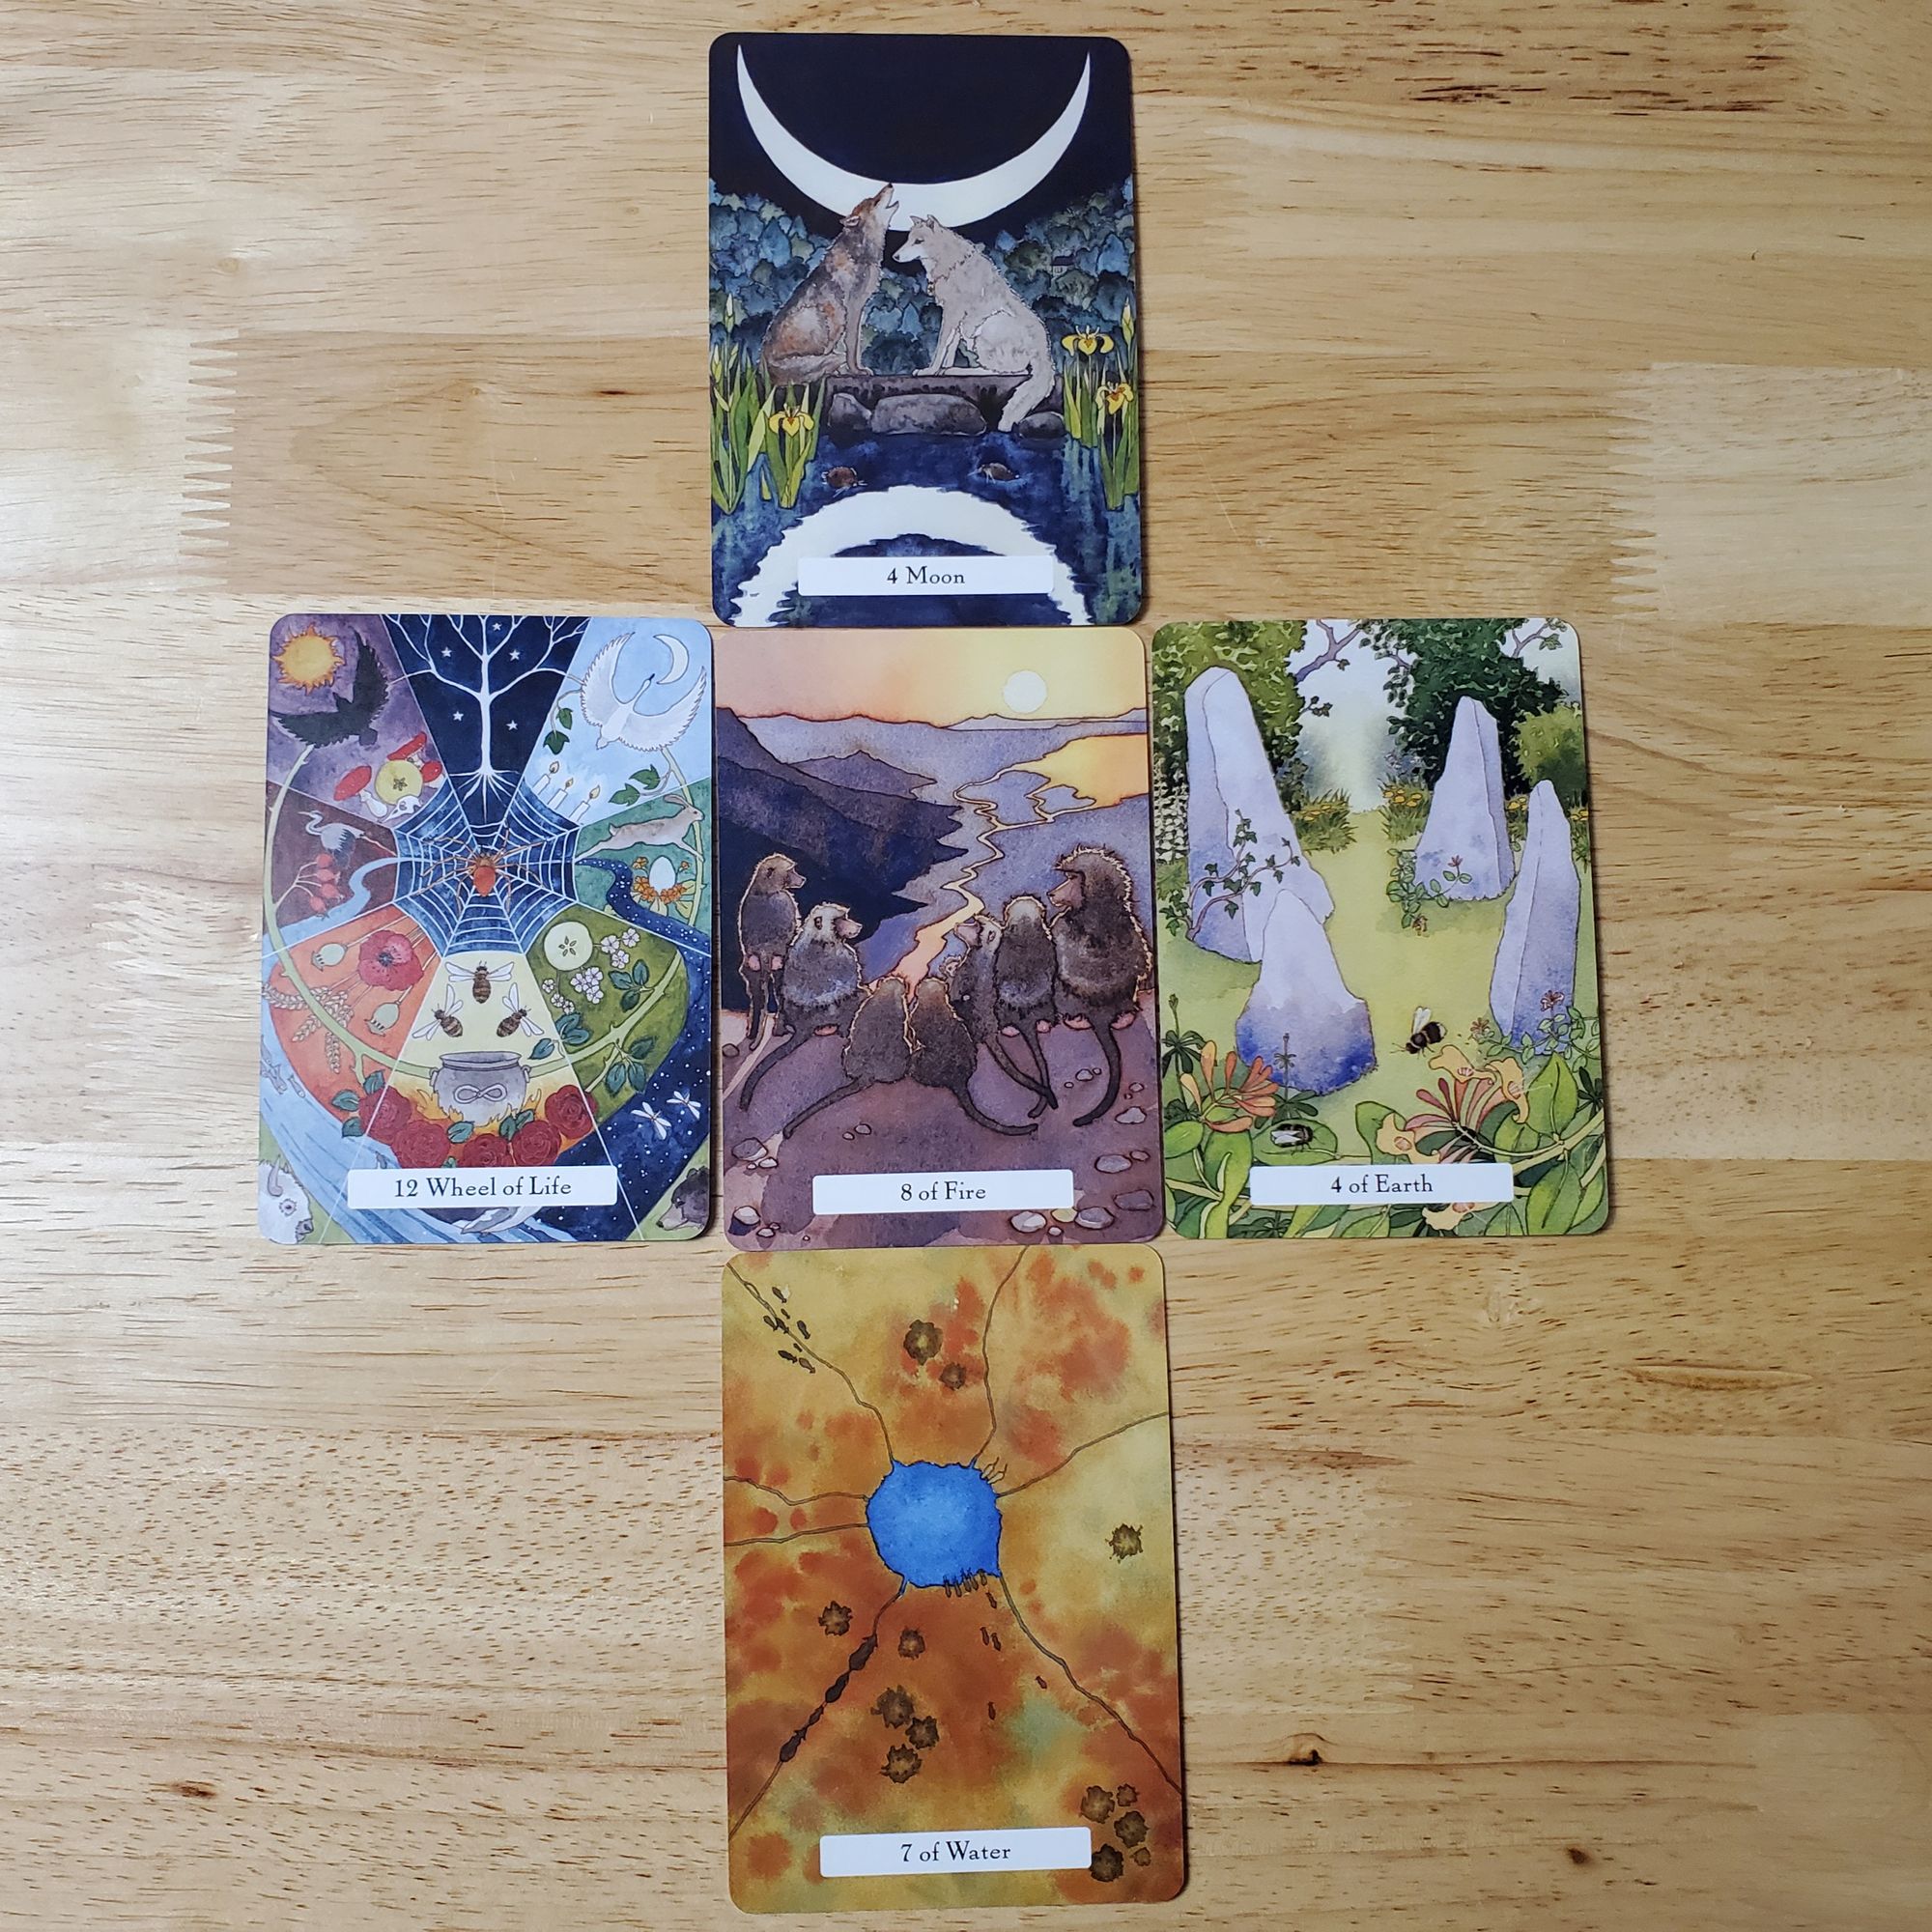 An example of the Irish Spirit Wheel Spread using the Witches Wisdom Deck